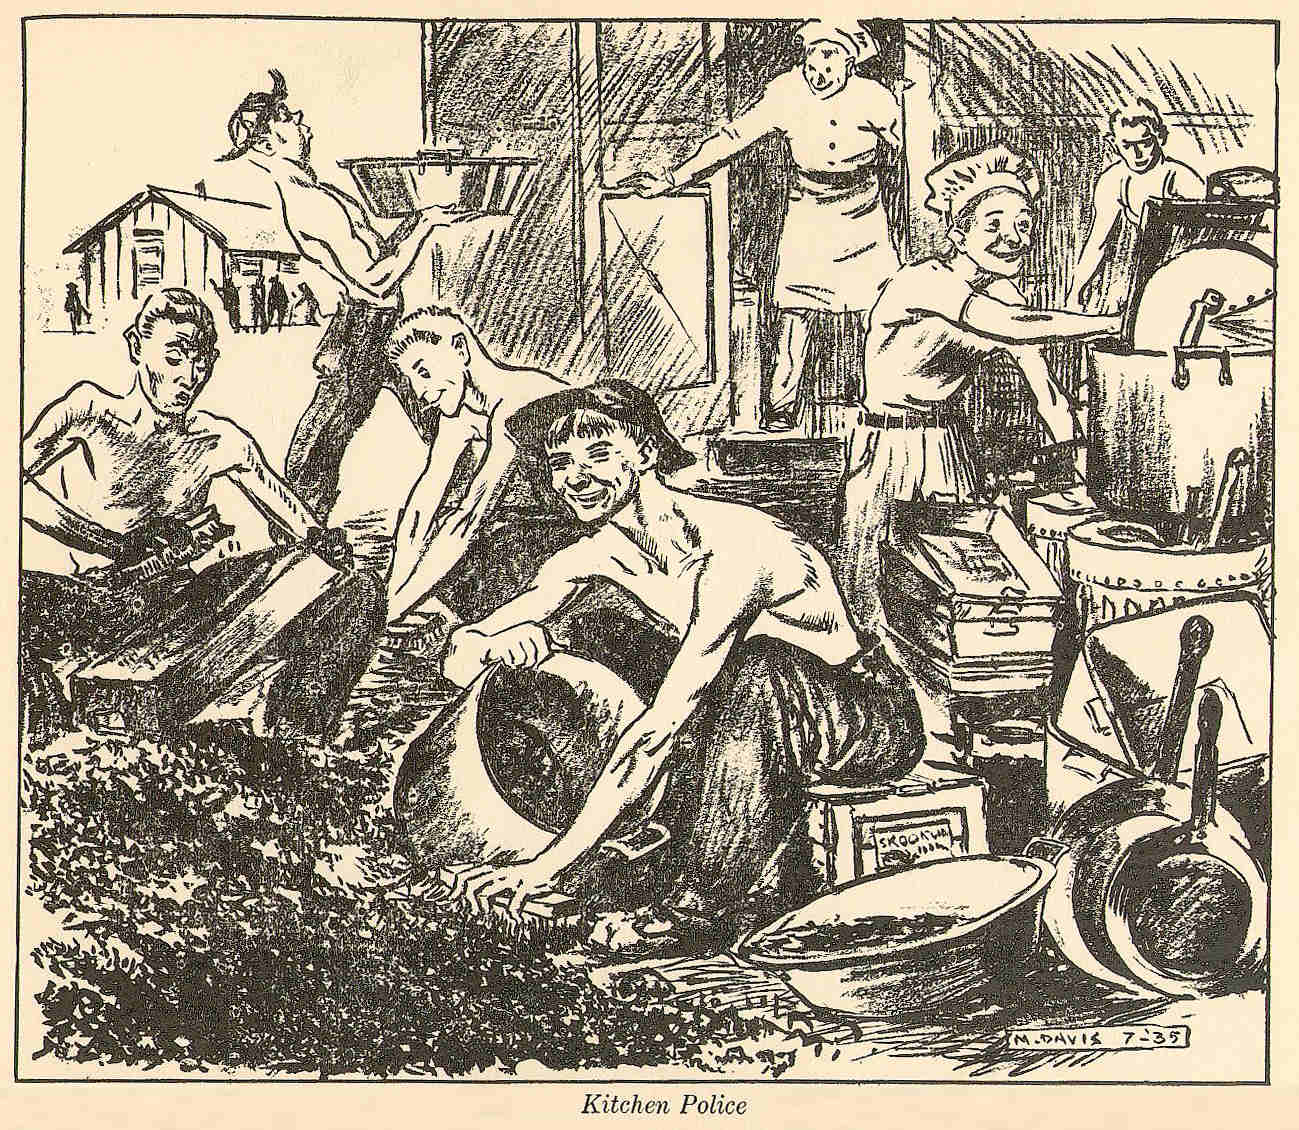 Illustration of men working behind the kitchen, cleaning dishes, etc.